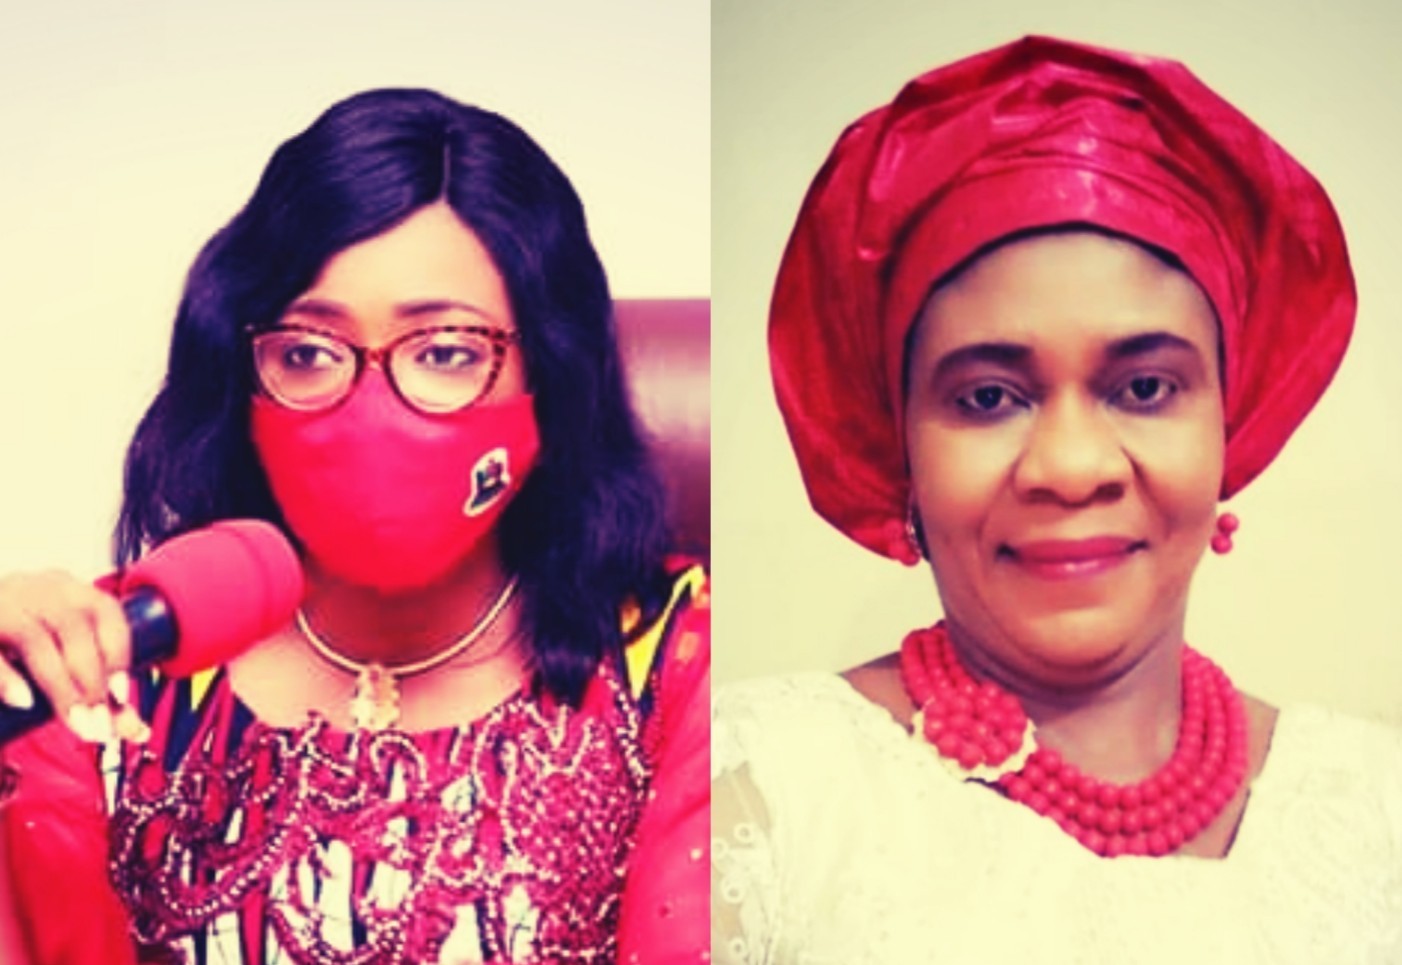 Maria Olodi-Osumah leads Bayelsa GRIT, charged to collectively fight GBV